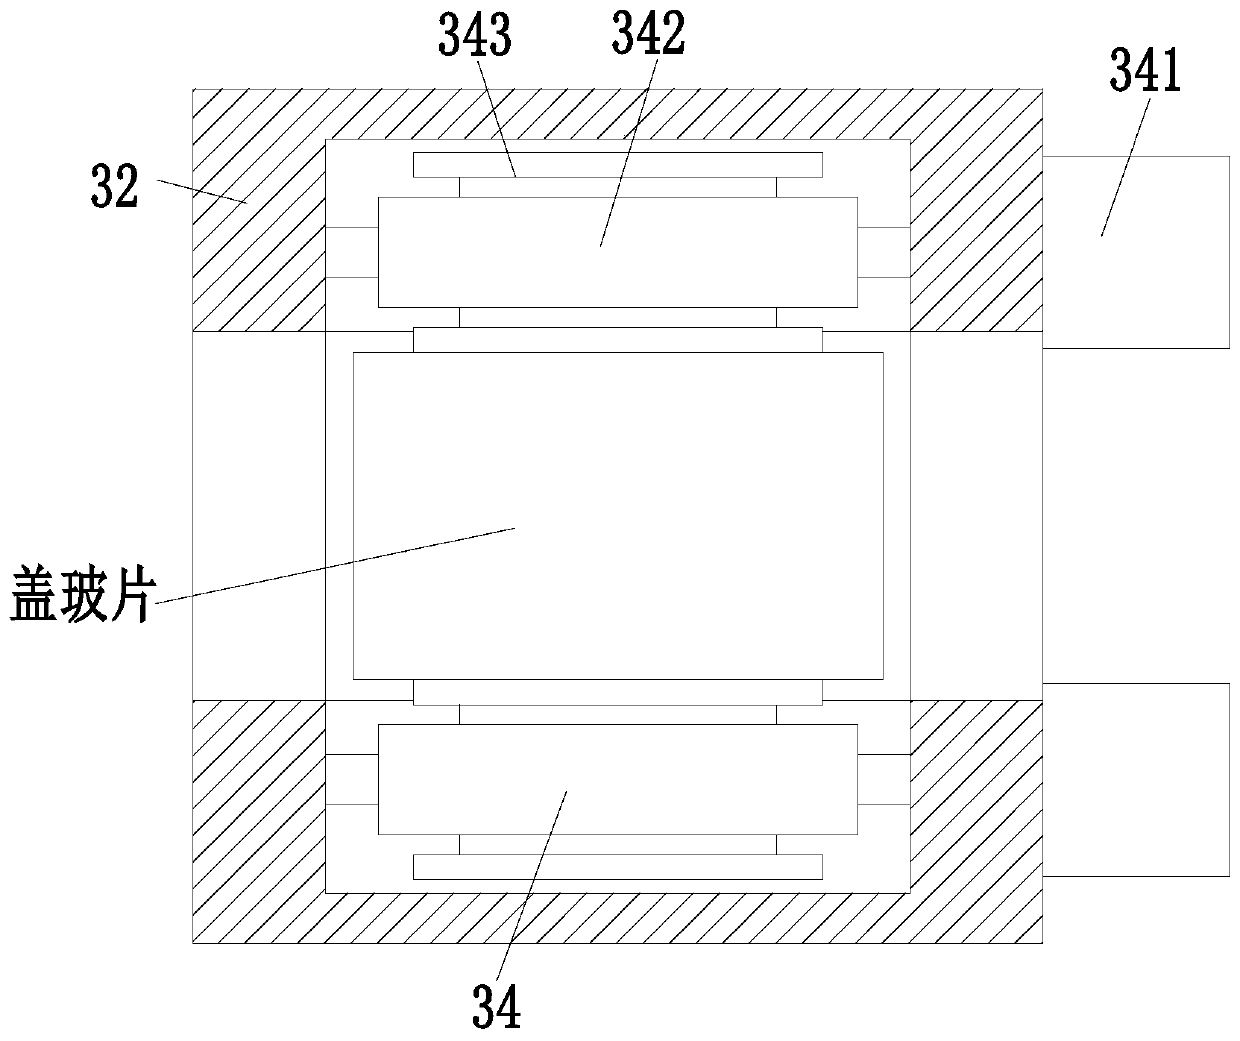 Chip mounting device for processing plant tissue slices serving as medical detection accessories